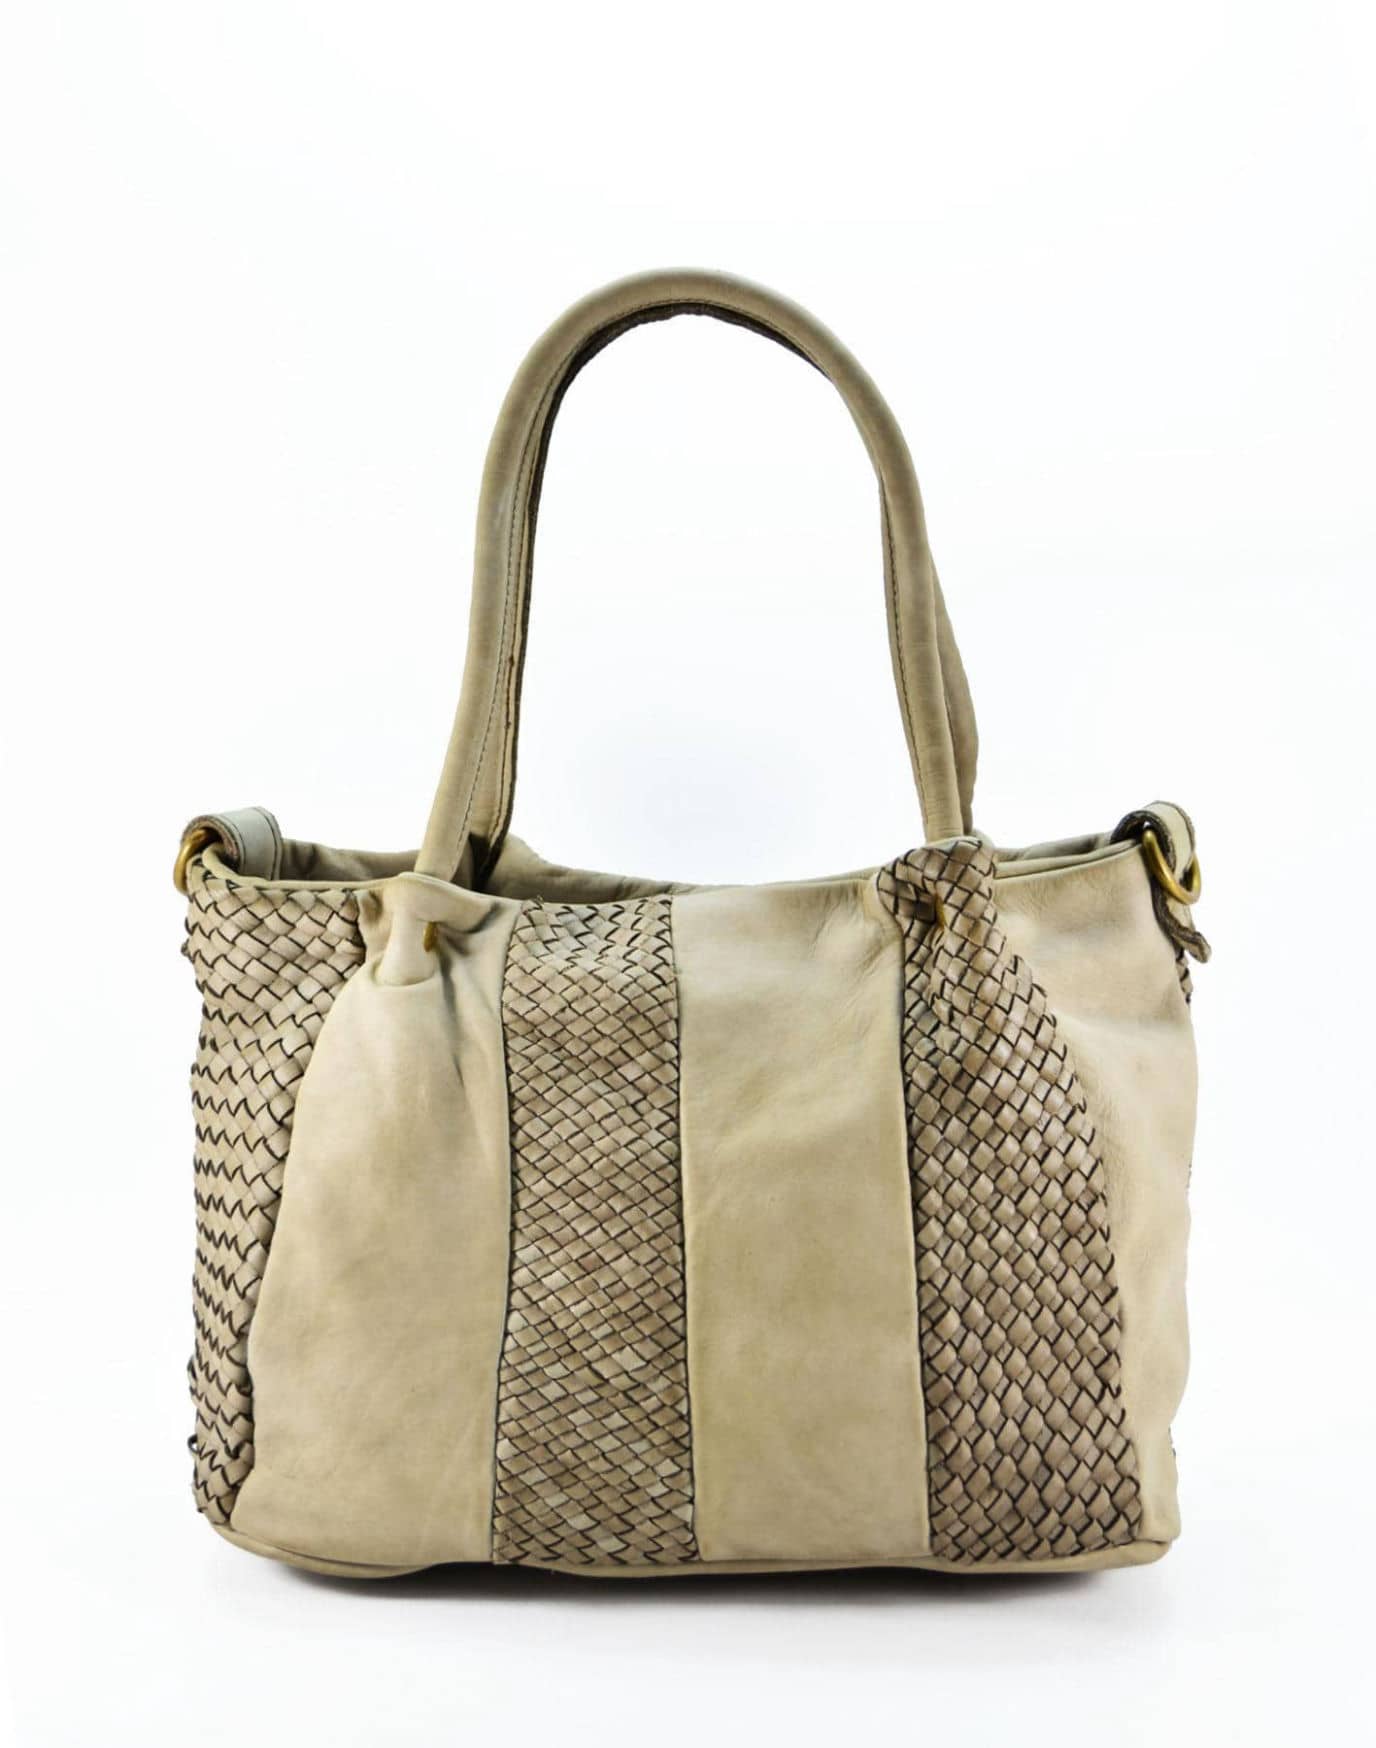 imade in italy fashion bags wholesale